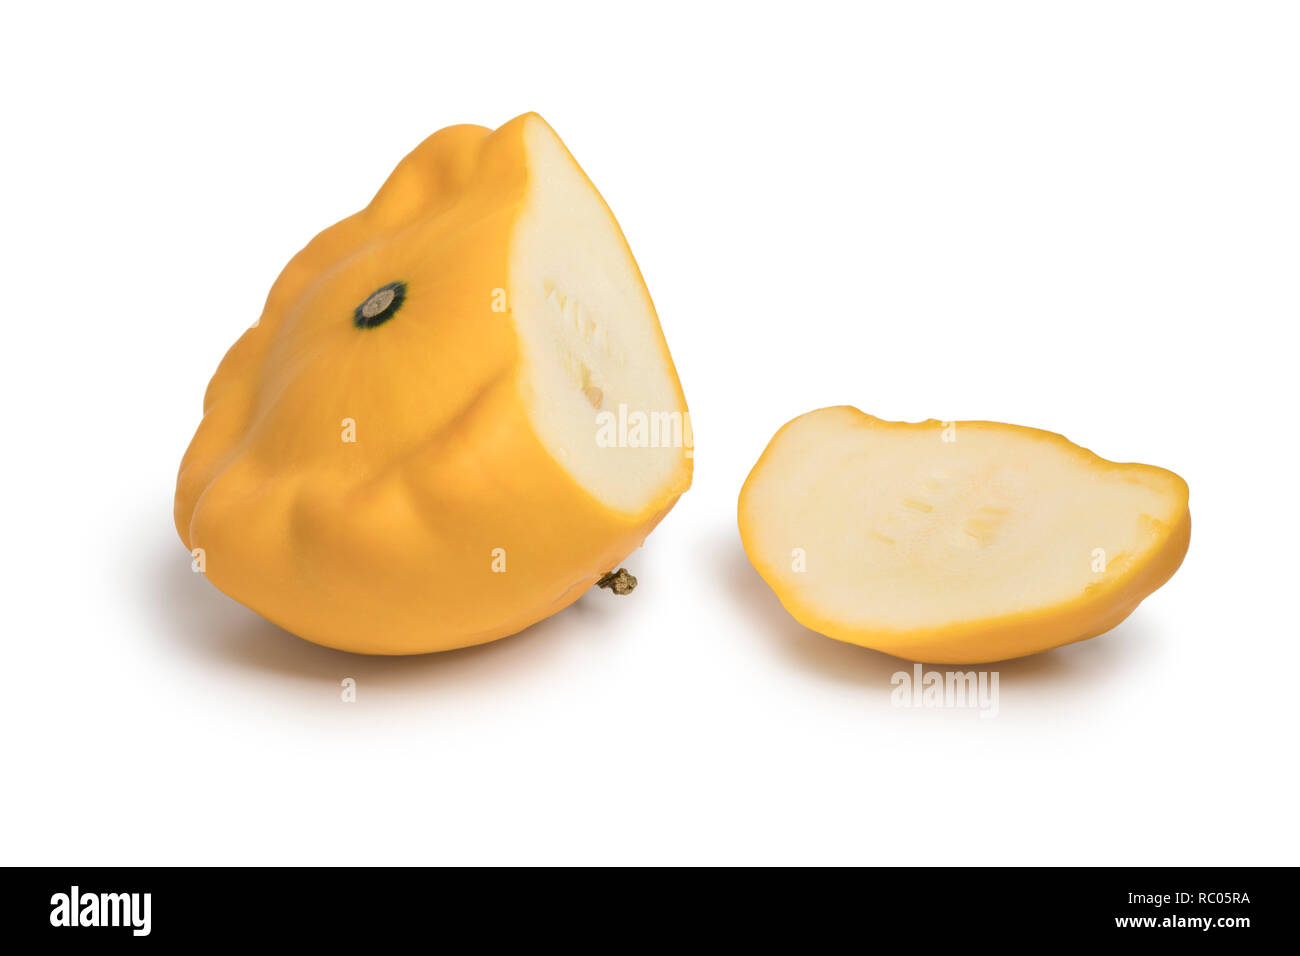 Yellow pattison and a slice isolated on white background Stock Photo